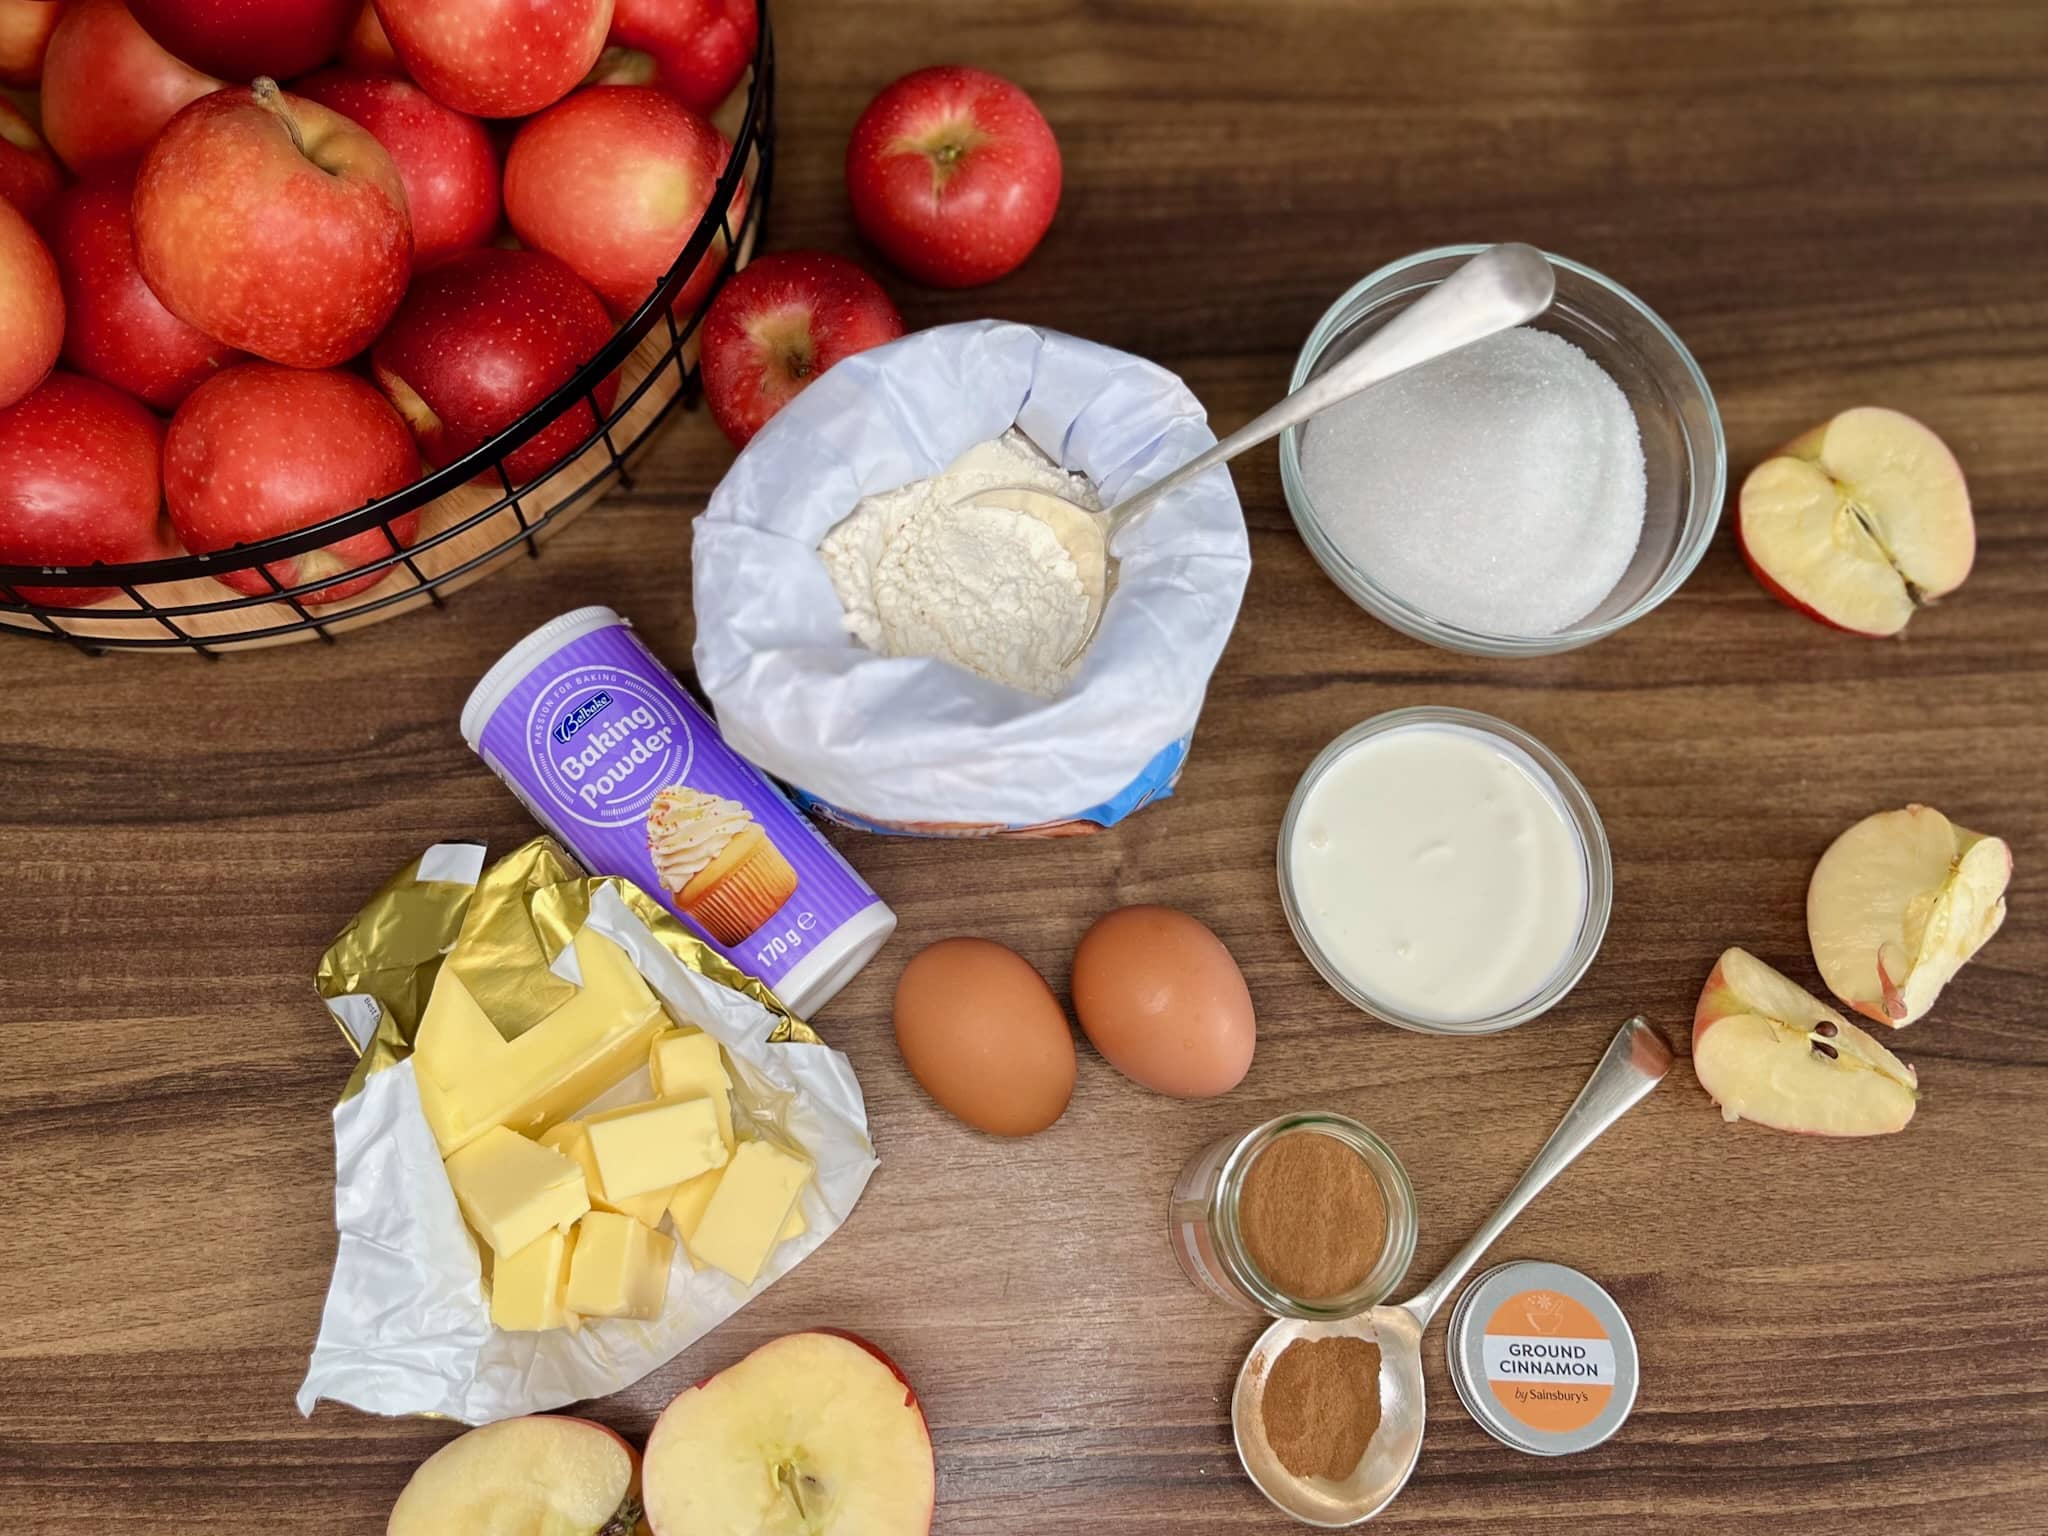 All the ingredients are gathered and ready to be used in the preparation of the Polish Apple Cake